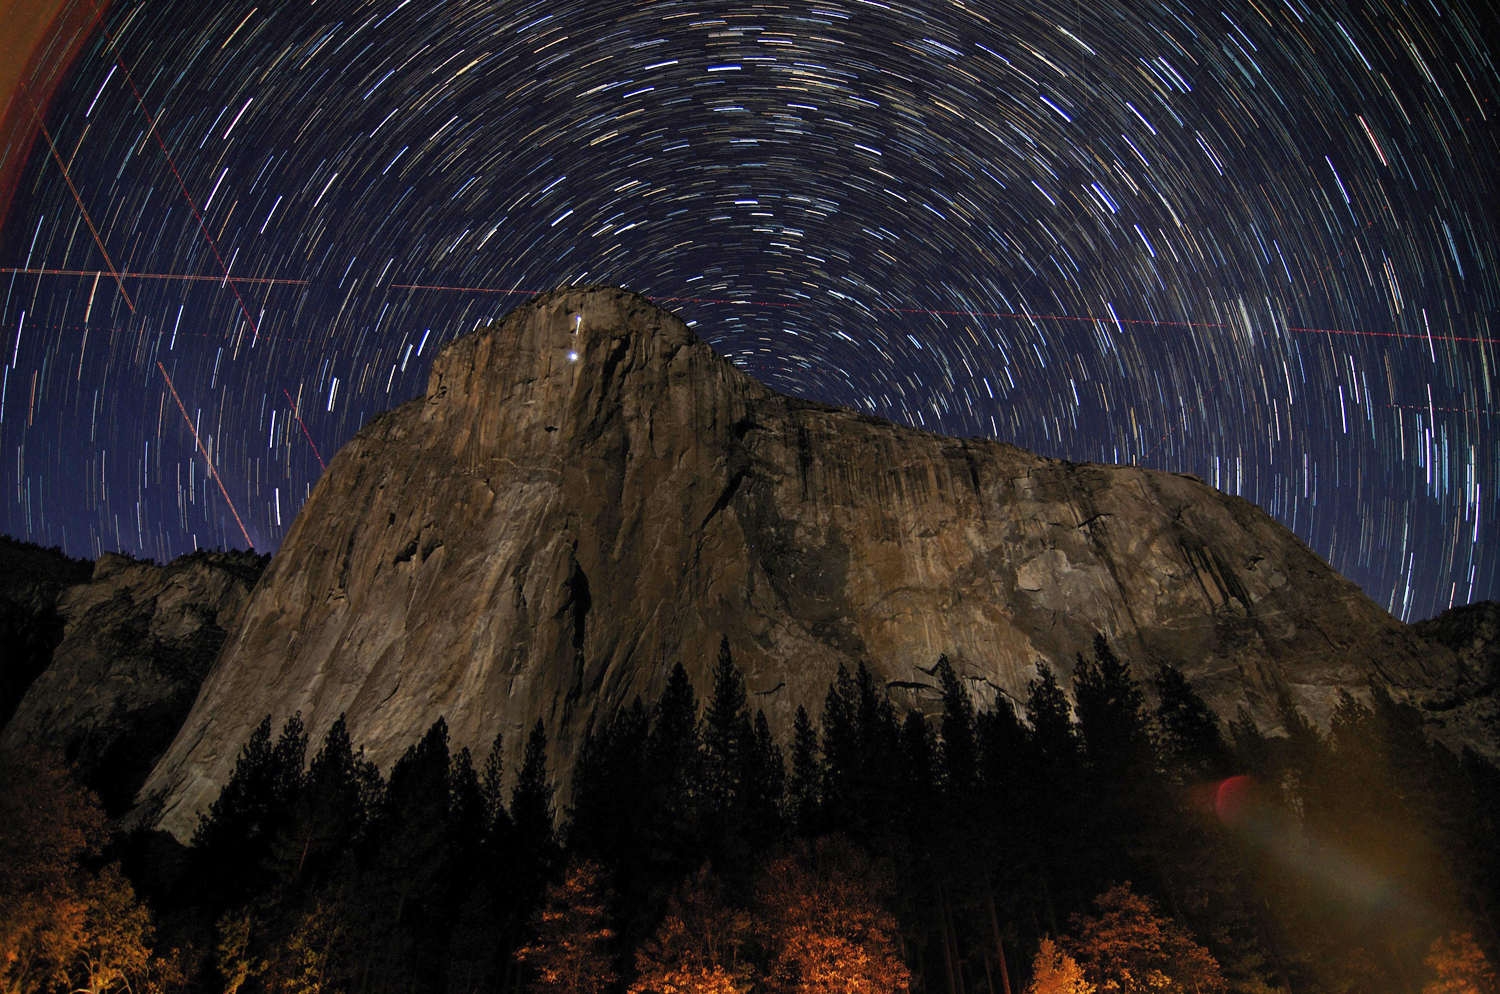 Star trails are visible over the granite face of El Capitan in Earth's Yosemite National Park in this image taken on November 8, 2013 and in March 2014. El Capitan hides the north celestial pole, which is at the center of all the star trails.